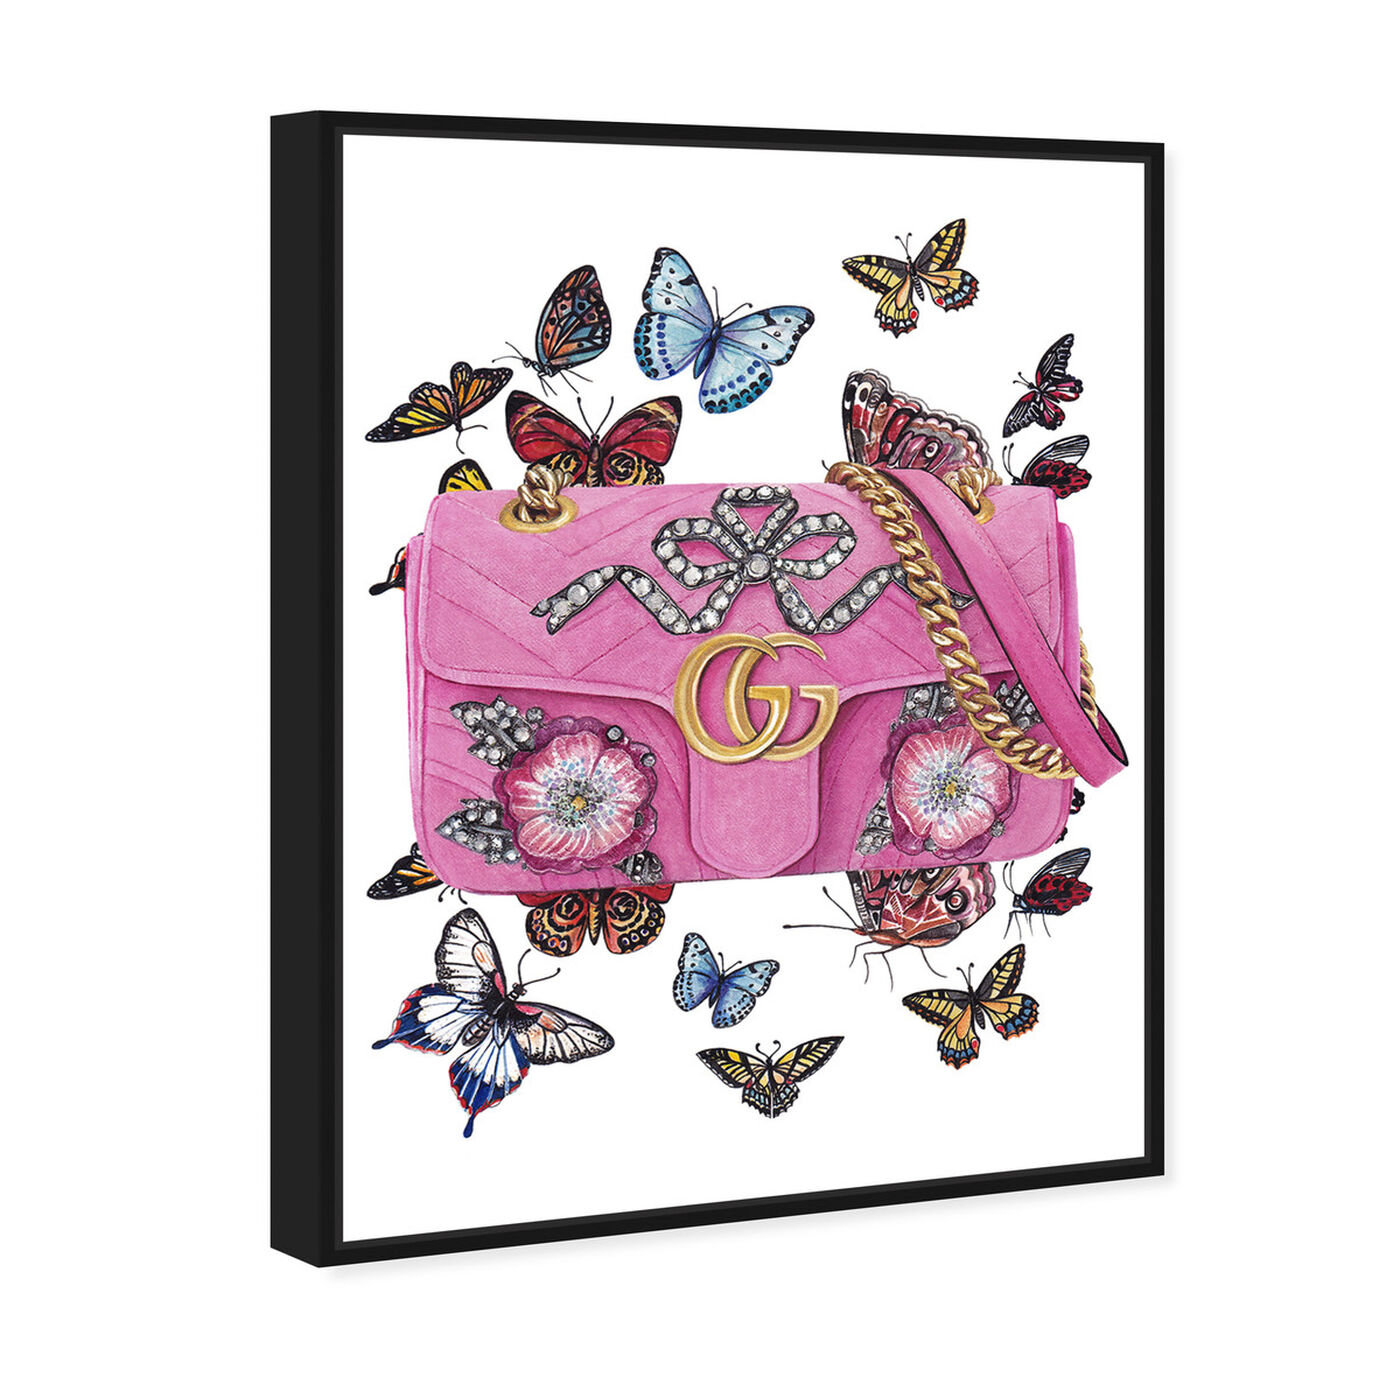 Angled view of Doll Memories - Butterflies featuring fashion and glam and handbags art.